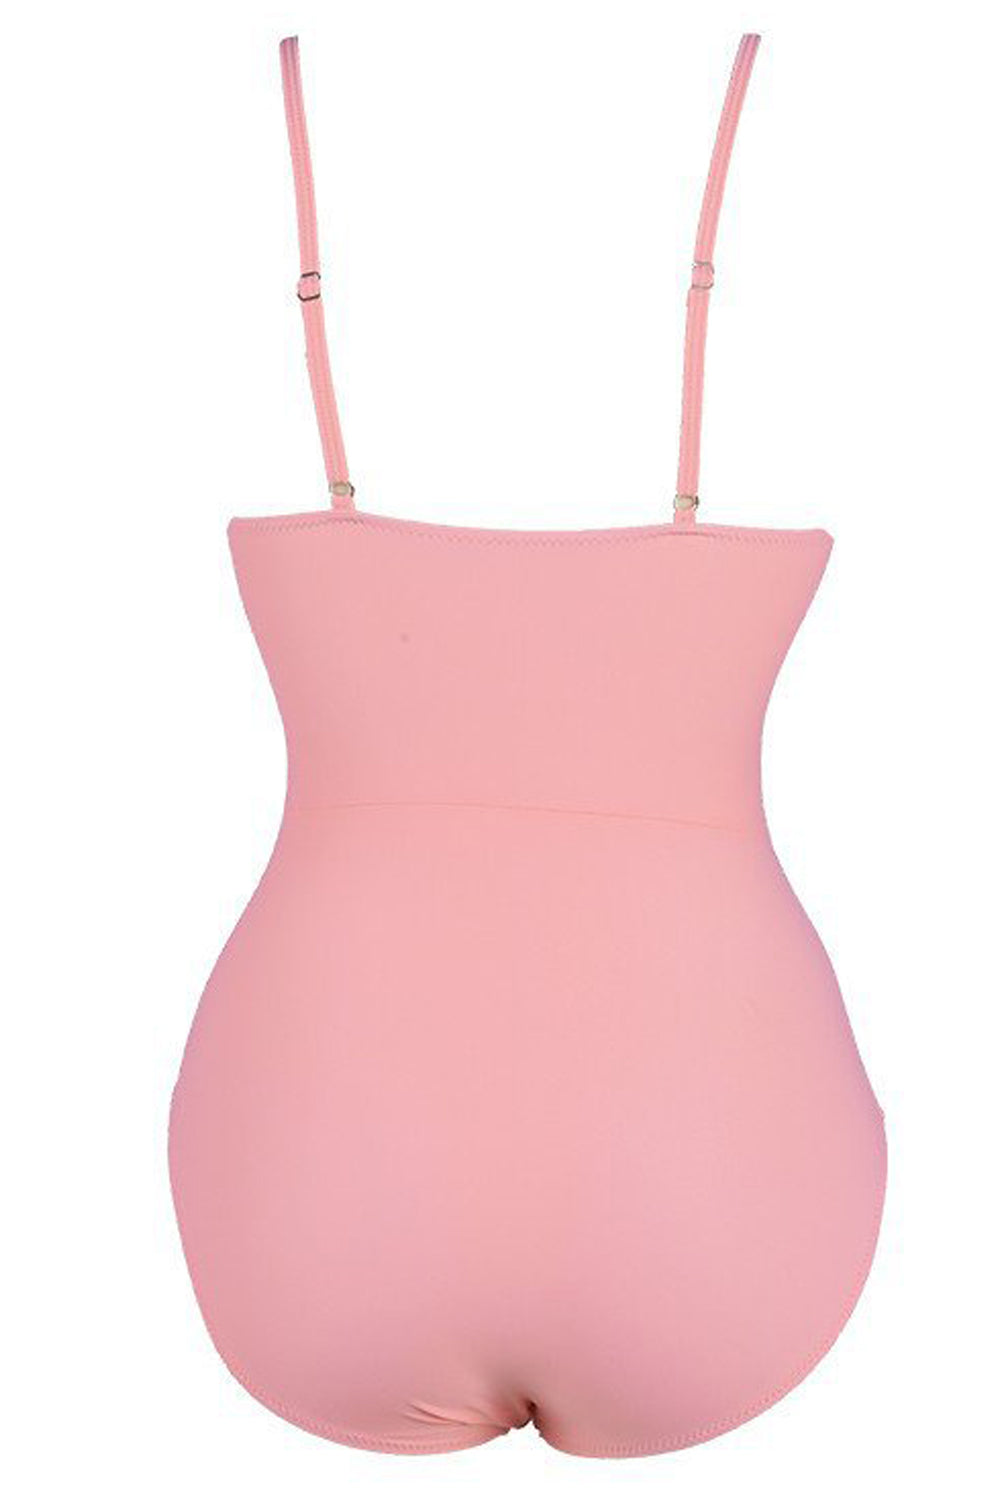 Iyasson Sweet Pink Lace Up One-piece Swimsuit